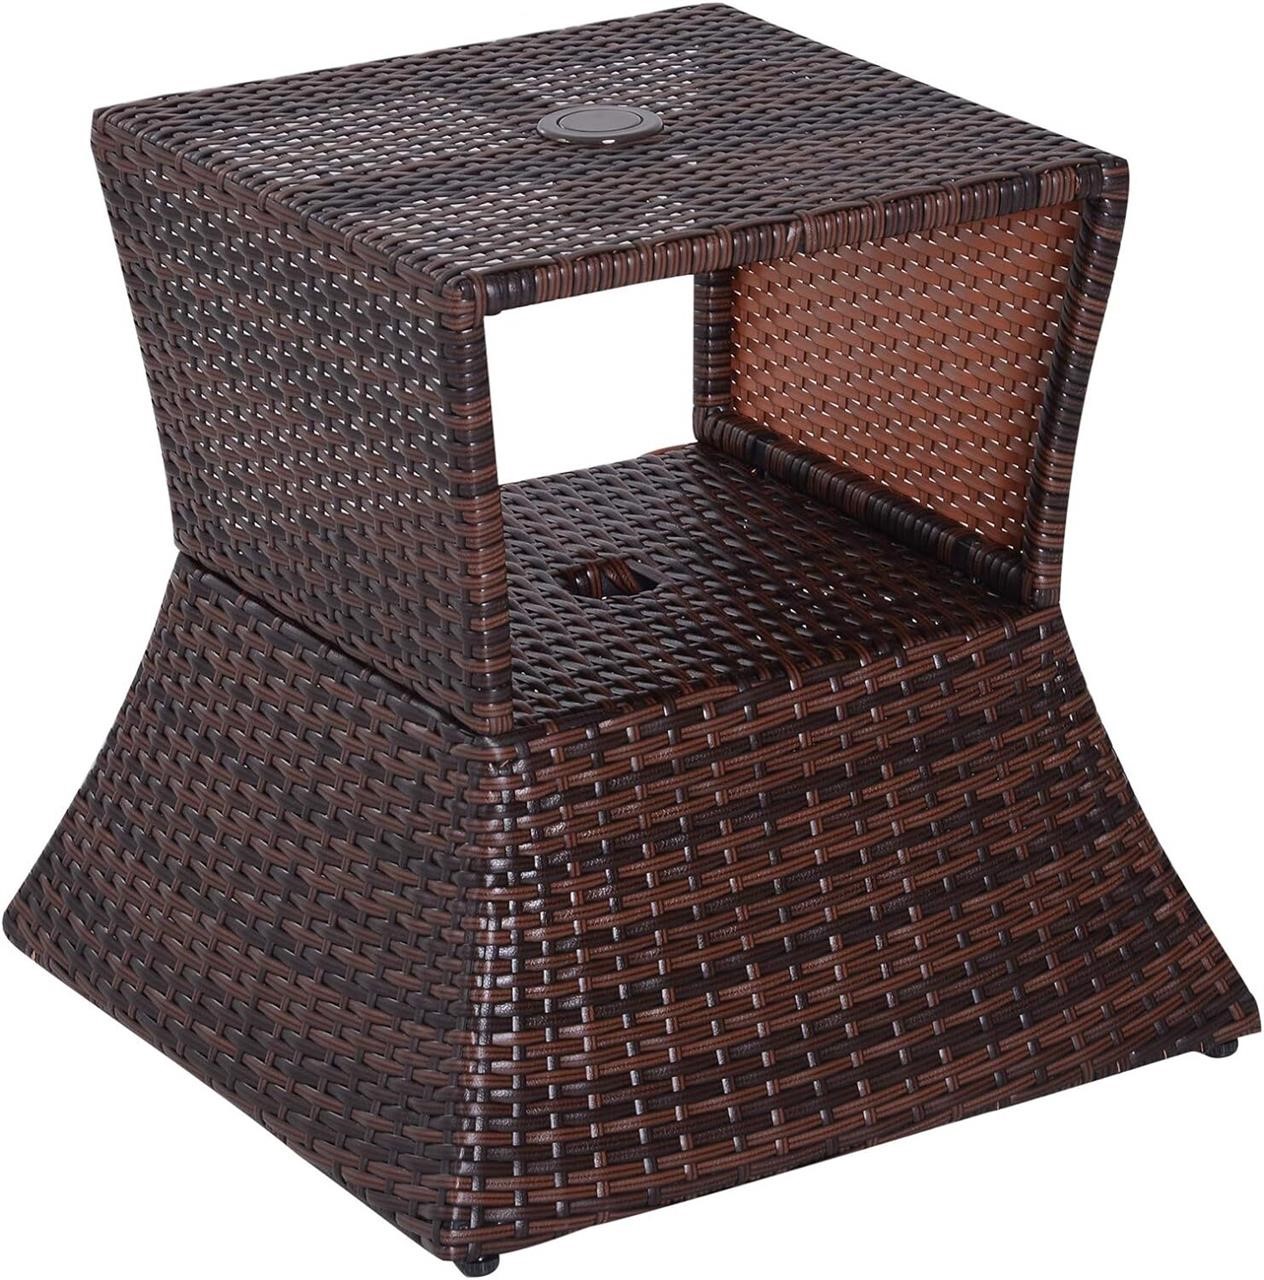 Outsunny Rattan Wicker Side Table with Umbrella Ho